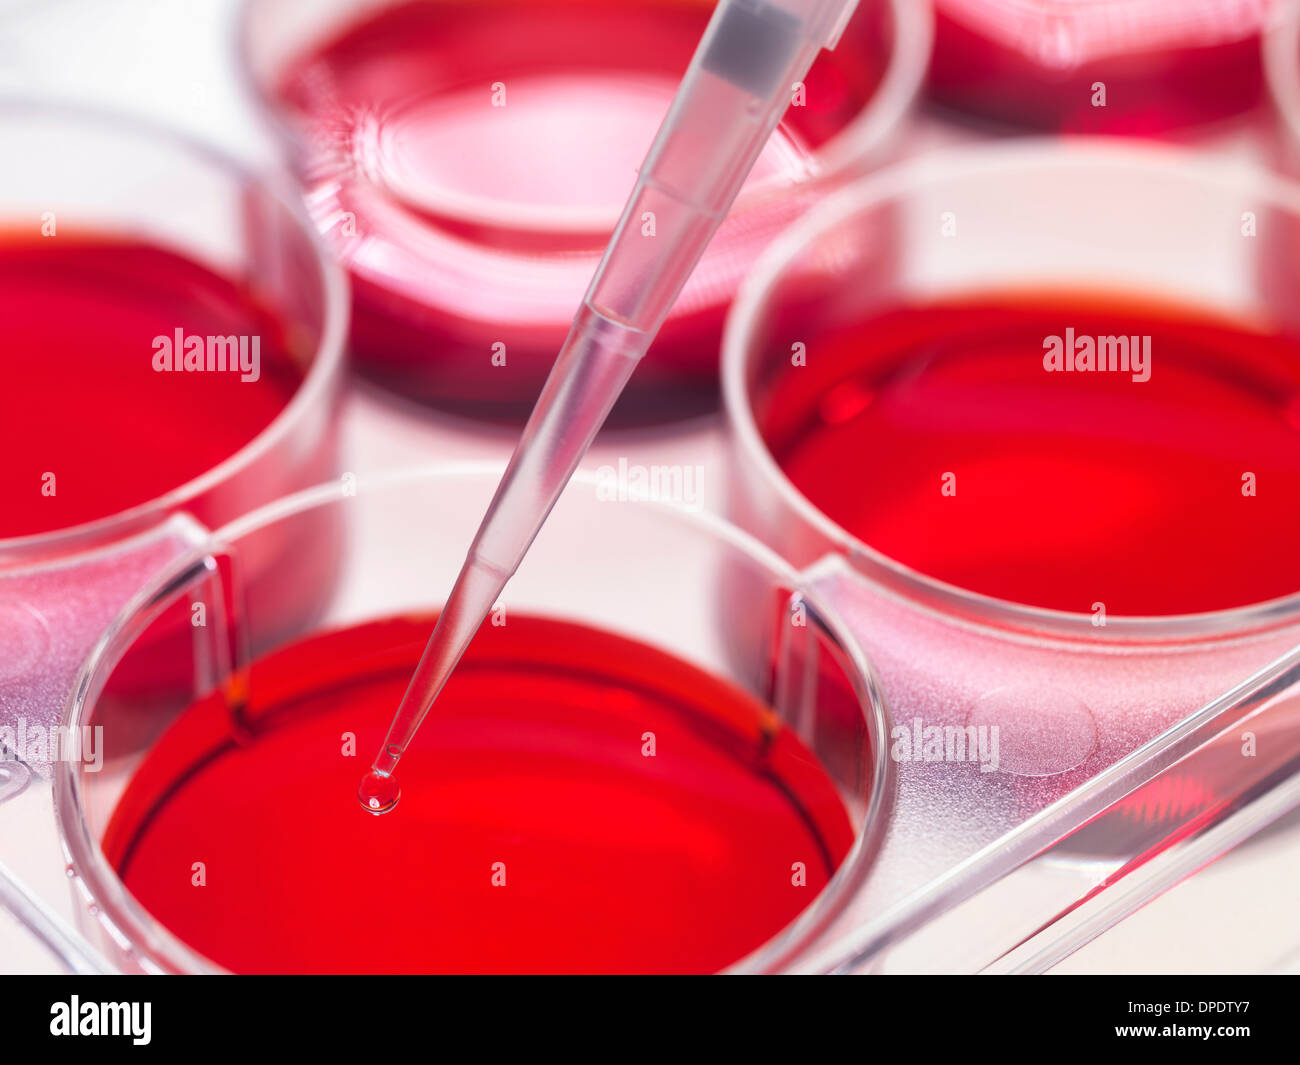 Pipette adding sample to stem cell cultures growing in pots, Used to implant stem cells to repair damaged tissues Stock Photo